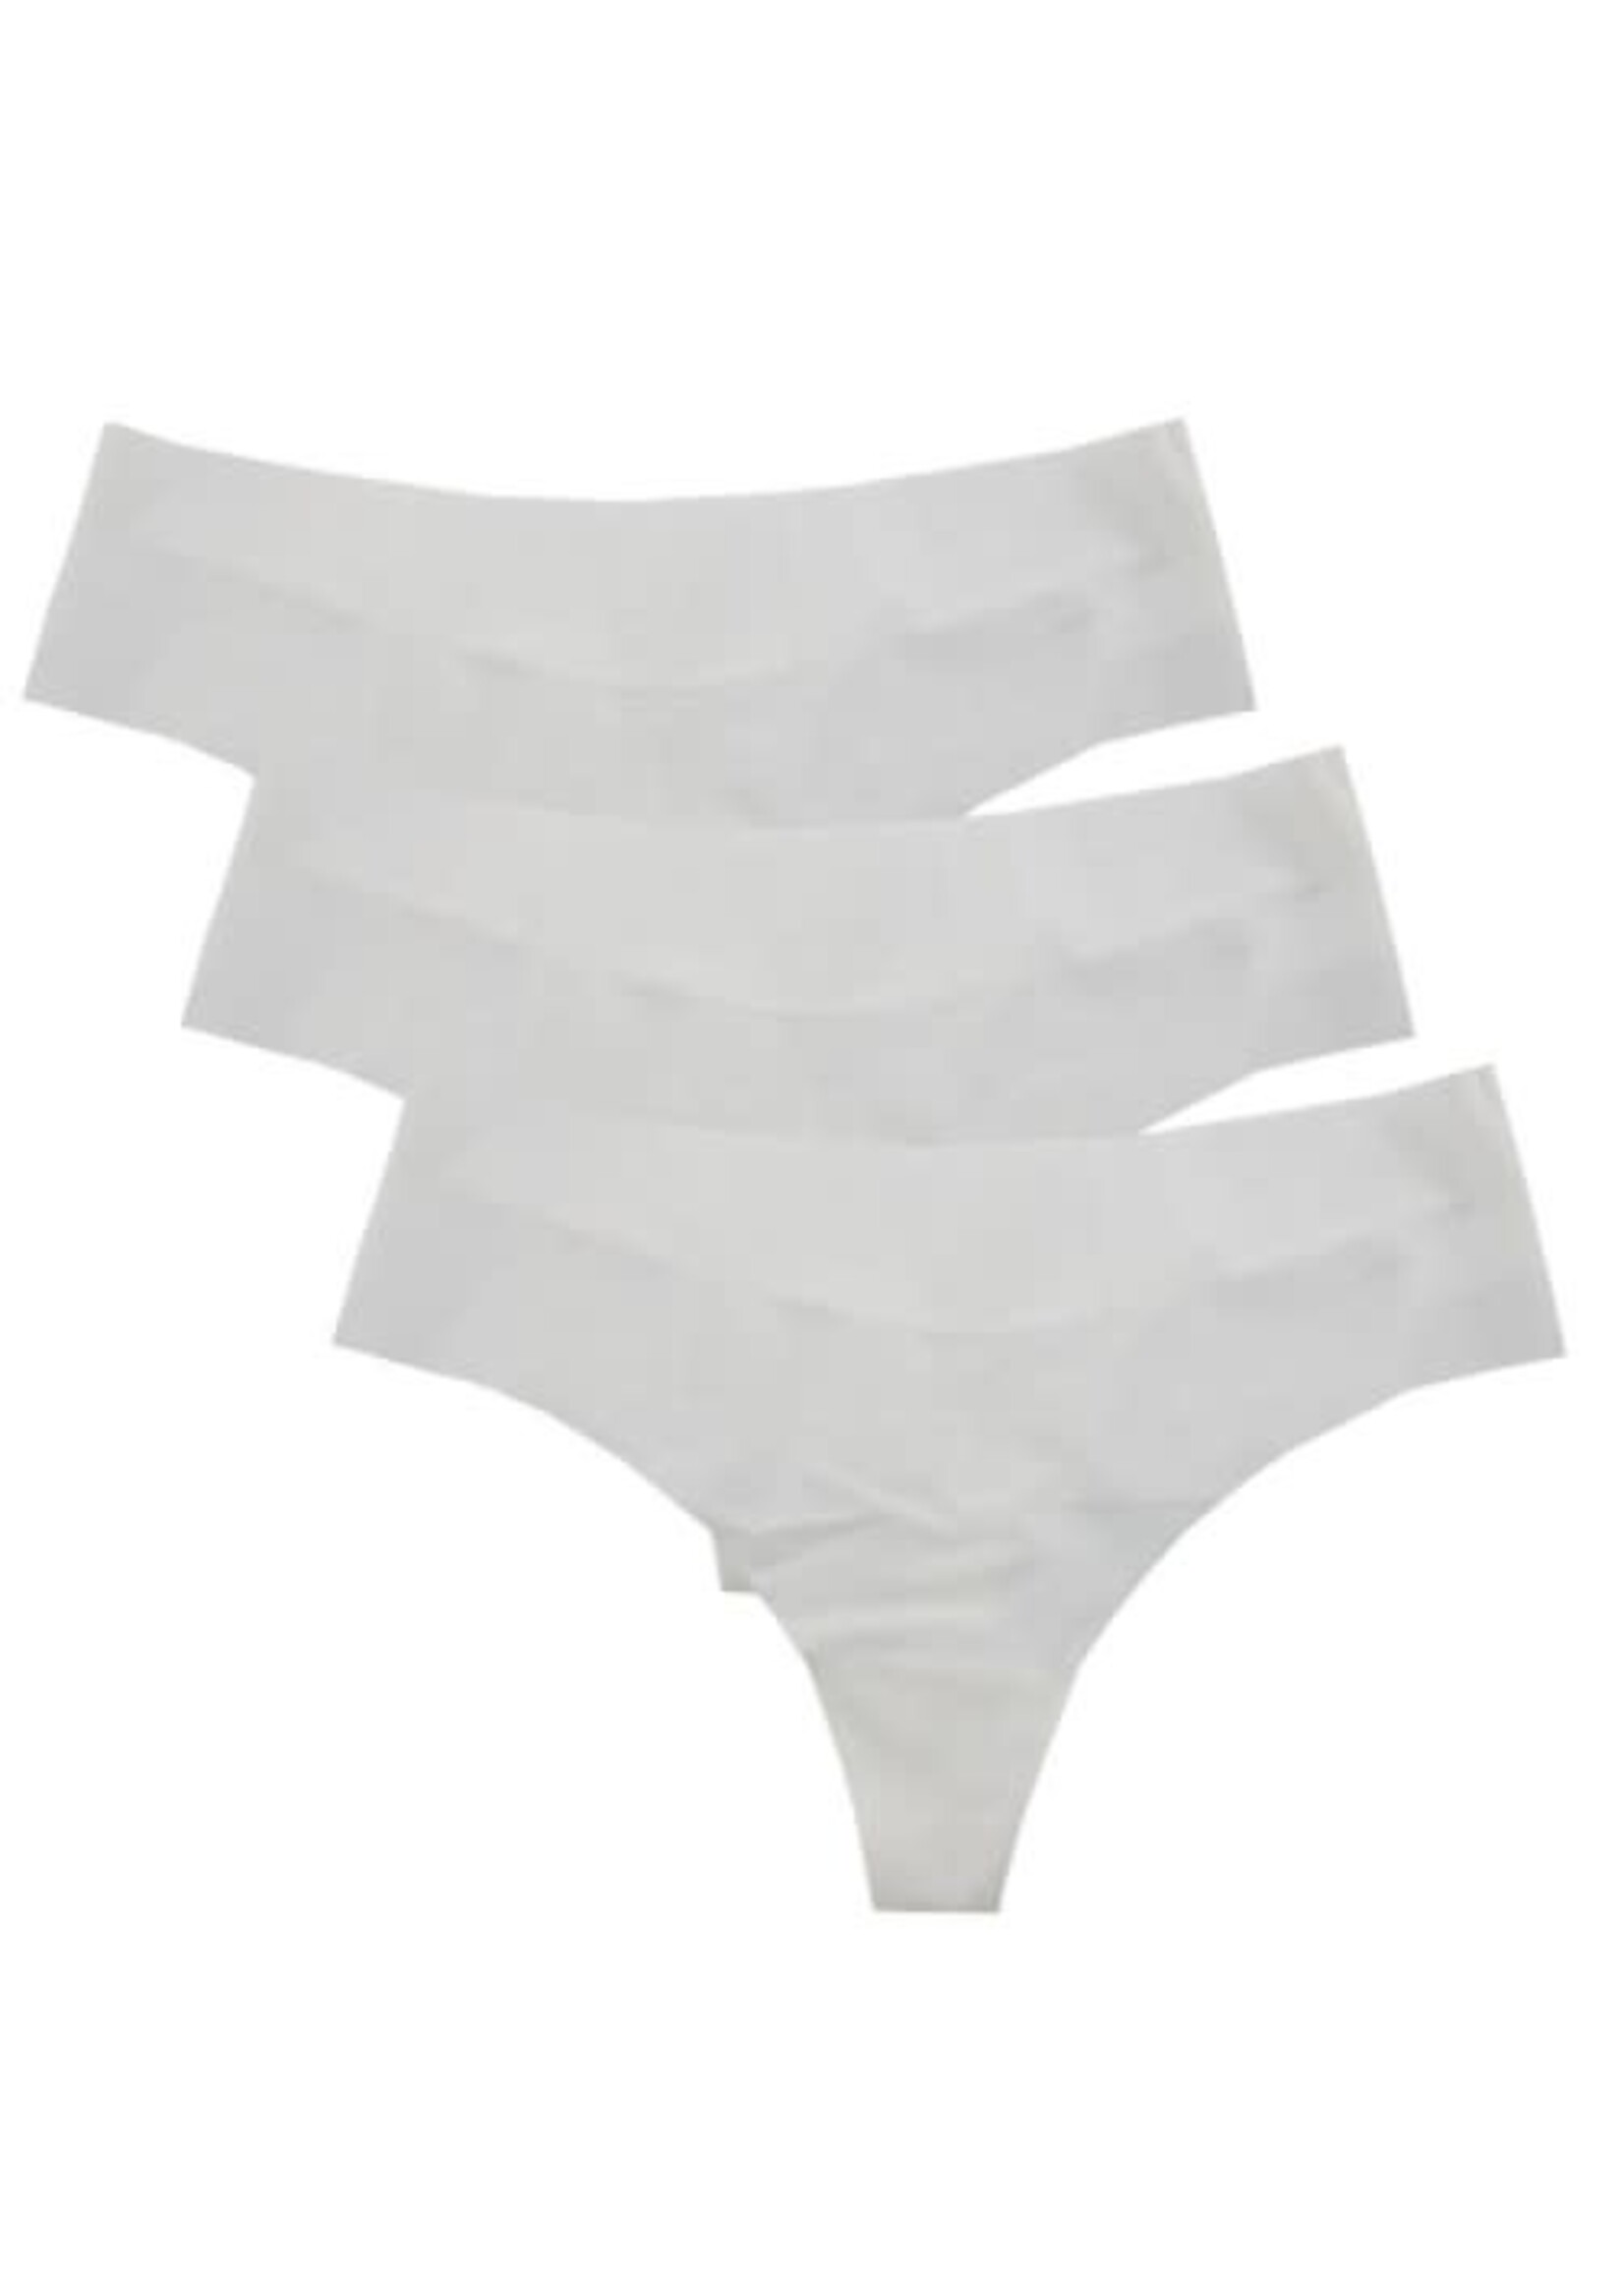 Hertex Hertex Laser Cut Thong with Lace